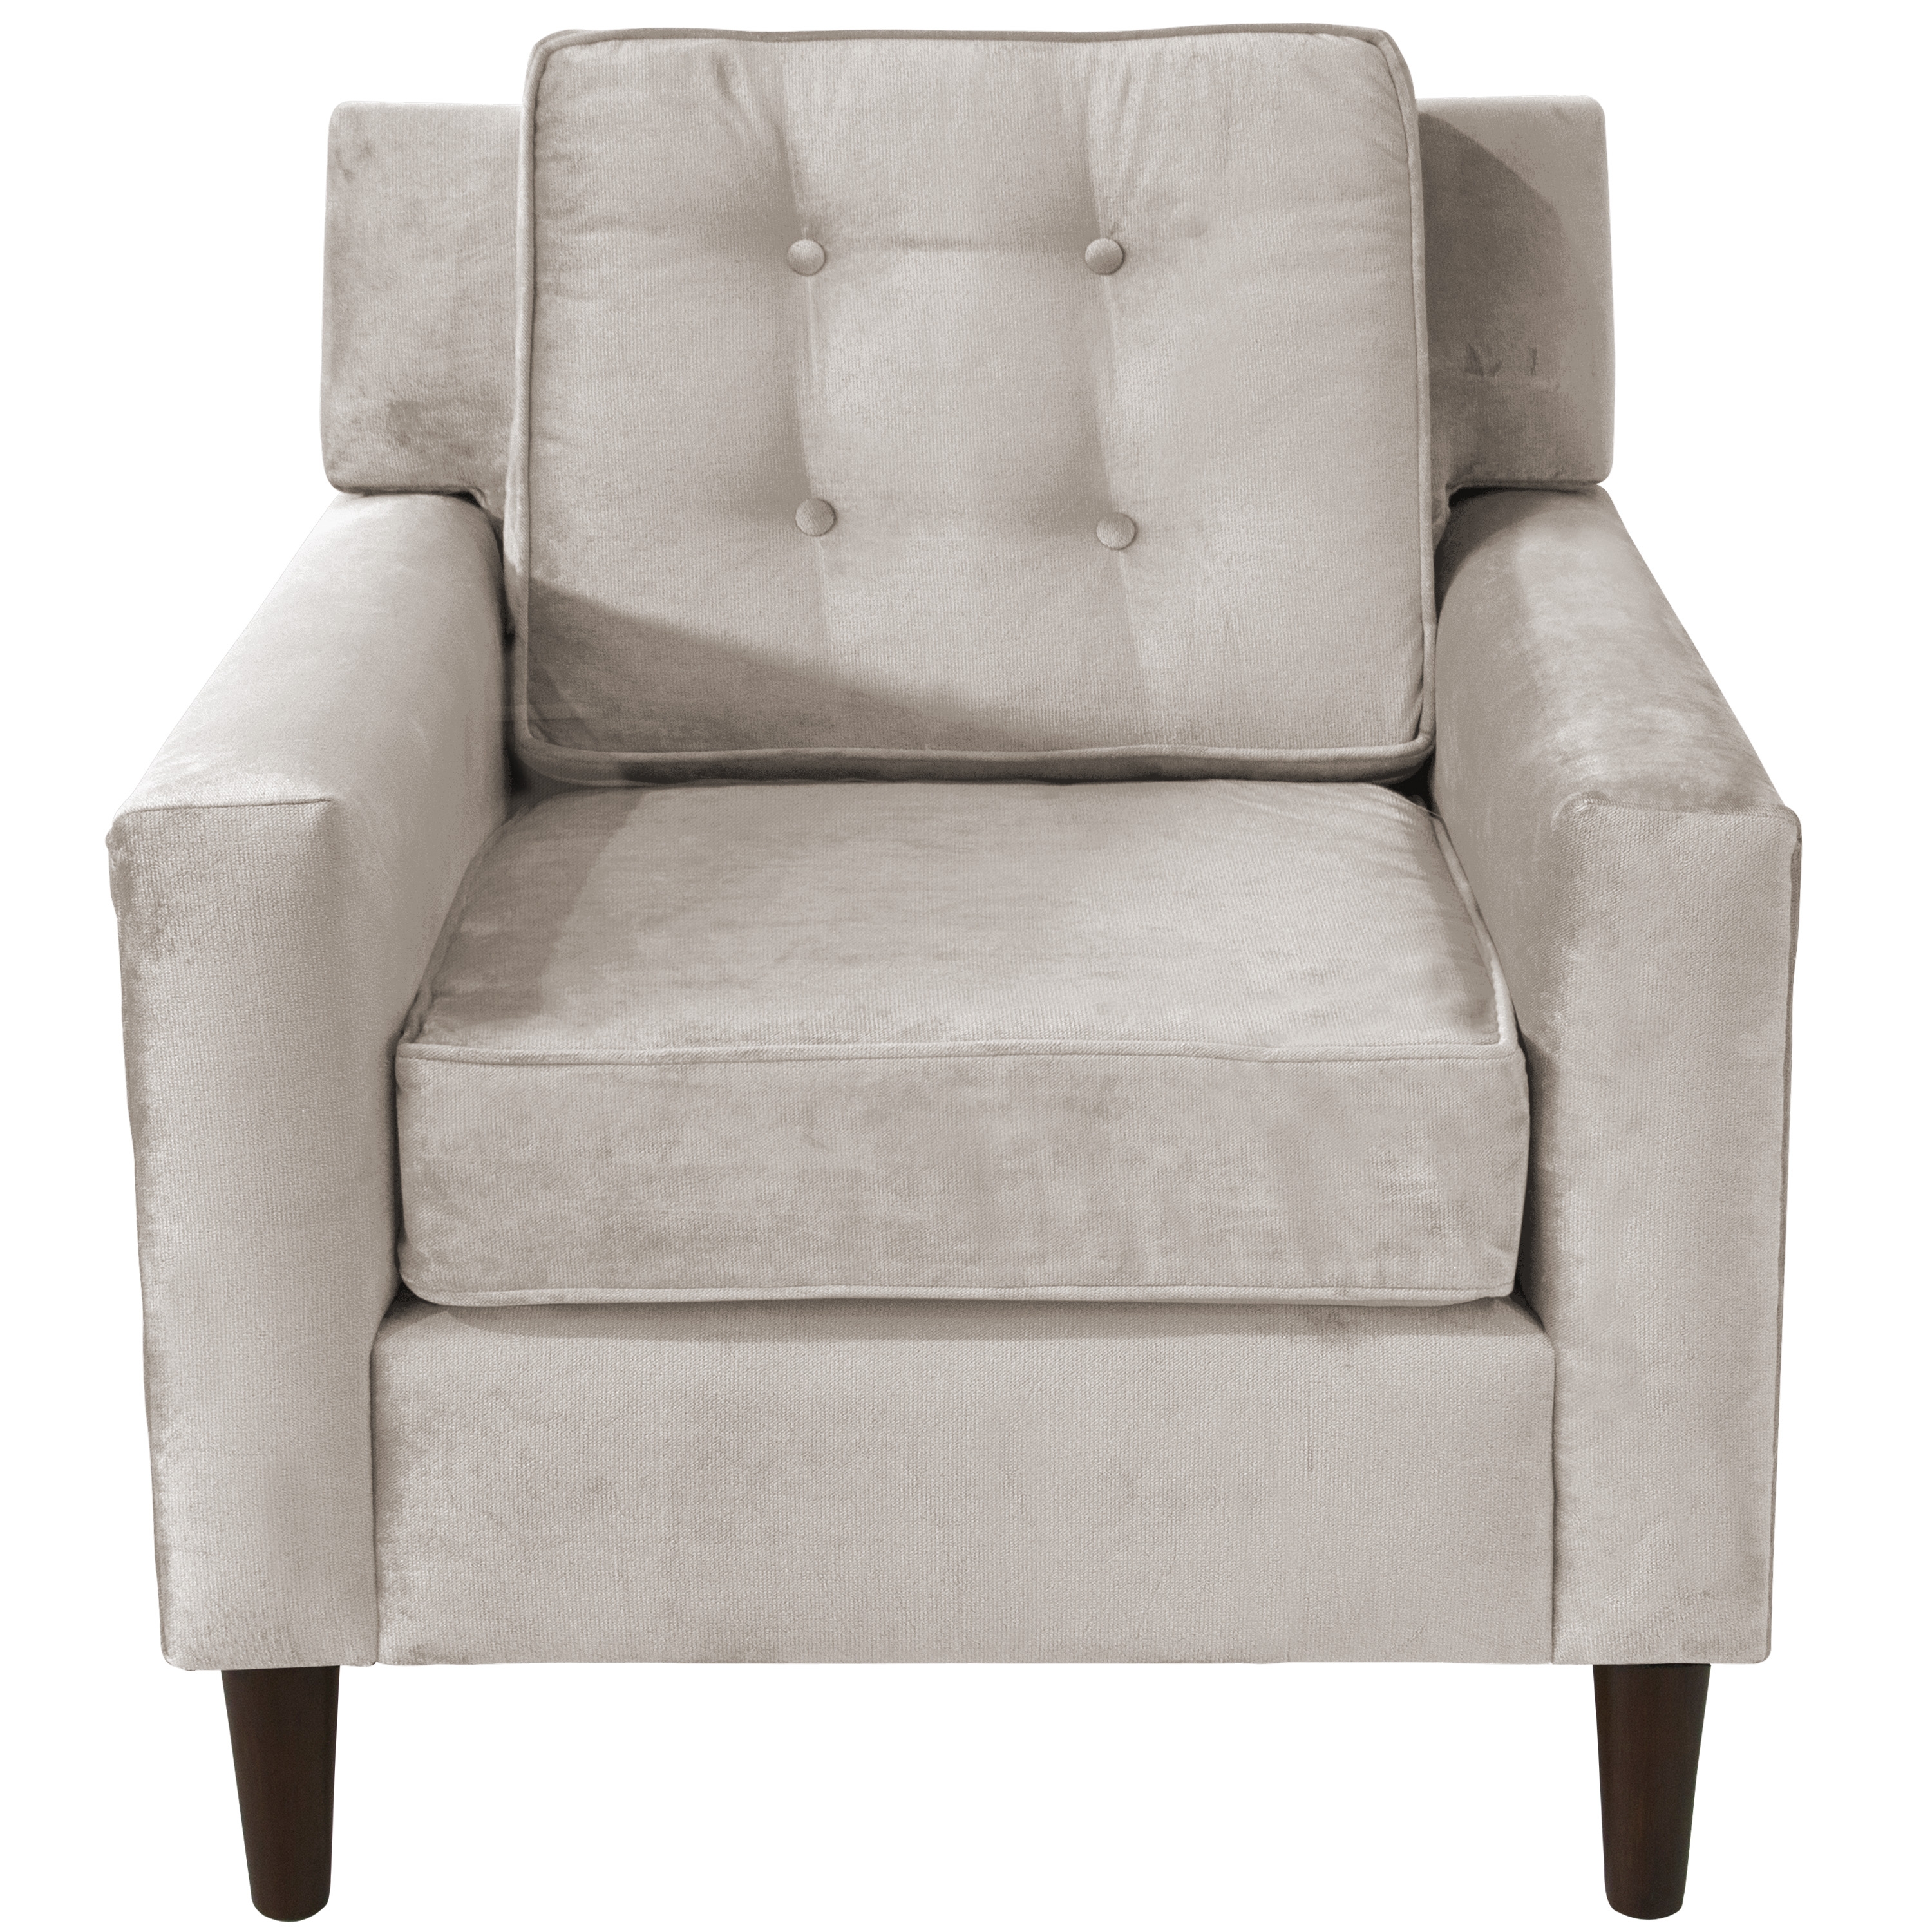 Parkview Chair - Image 1